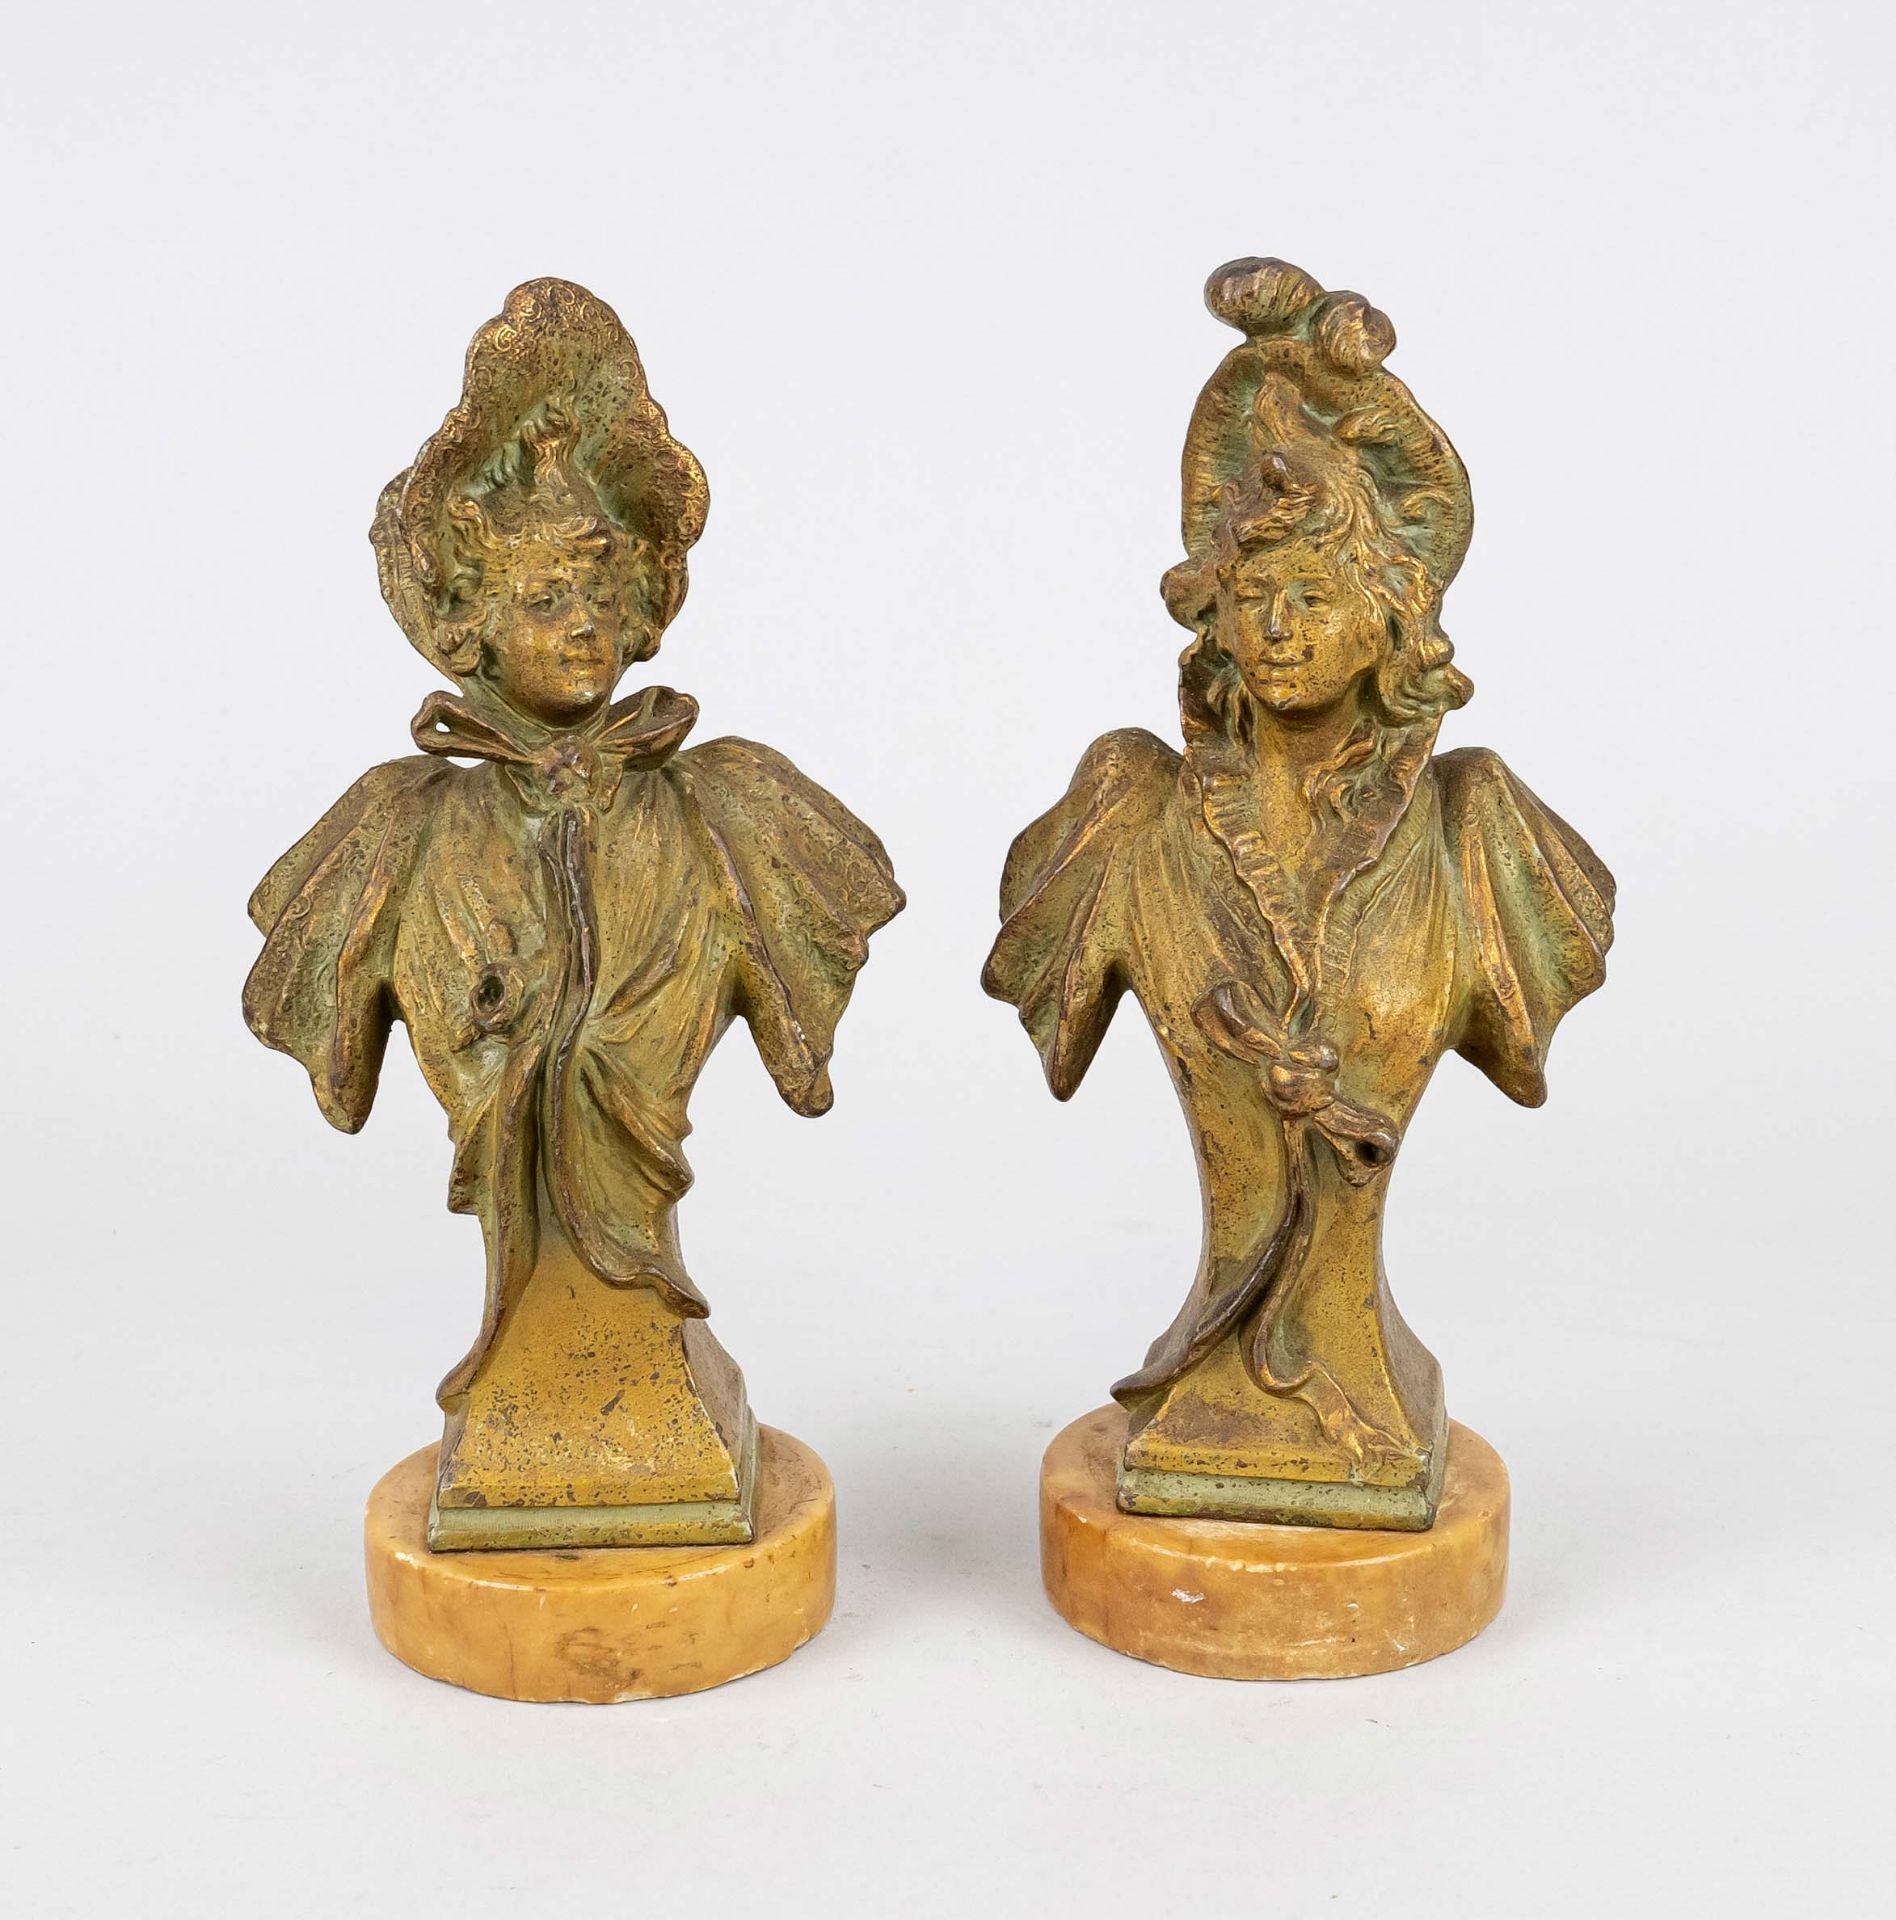 Anonymous sculptor around 1900, pair of busts, green-gold patinated metal casting on alabaster